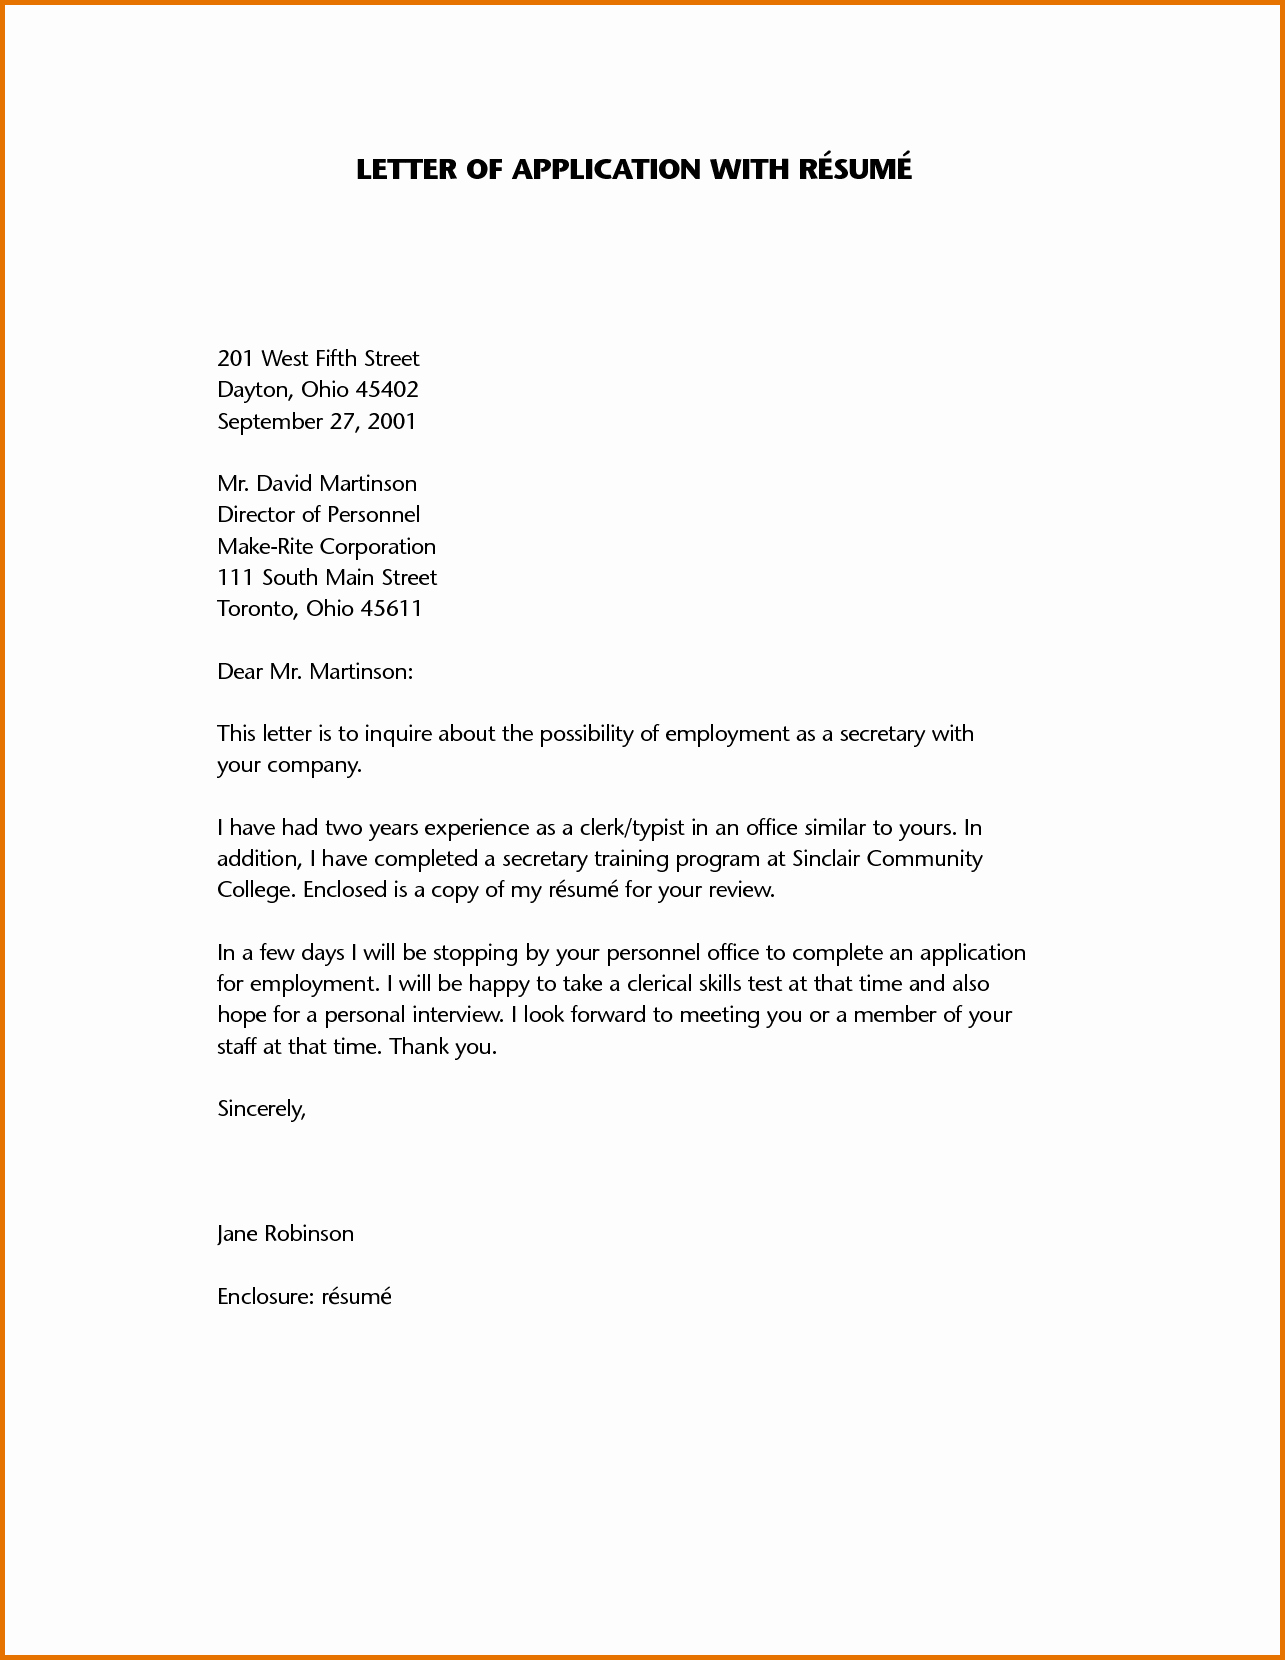 Cv and Cover Letter Template Elegant Sample Of Application Letter and Resumereference Letters